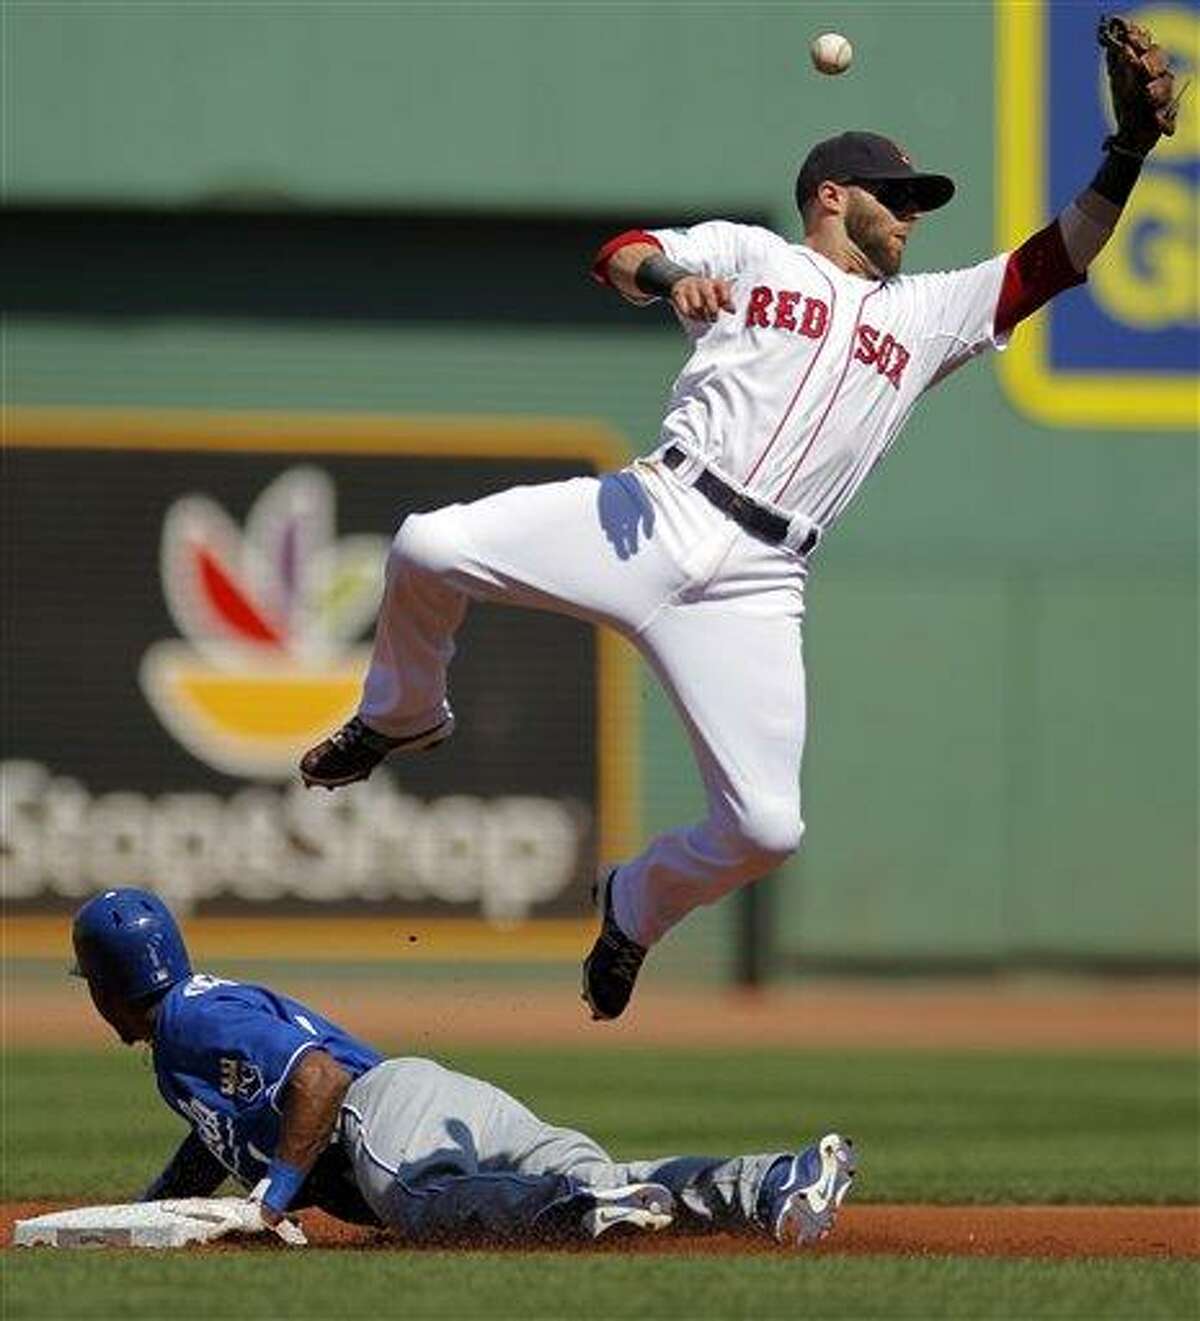 Kansas City Royals' Jarrod Dyson, bottom, steals second base as Boston Red Sox's Dustin Pedroia tries to get his glove on the ball in the first inning of a baseball game at Fenway Park, Monday, Aug. 27, 2012. (AP Photo/Steven Senne)